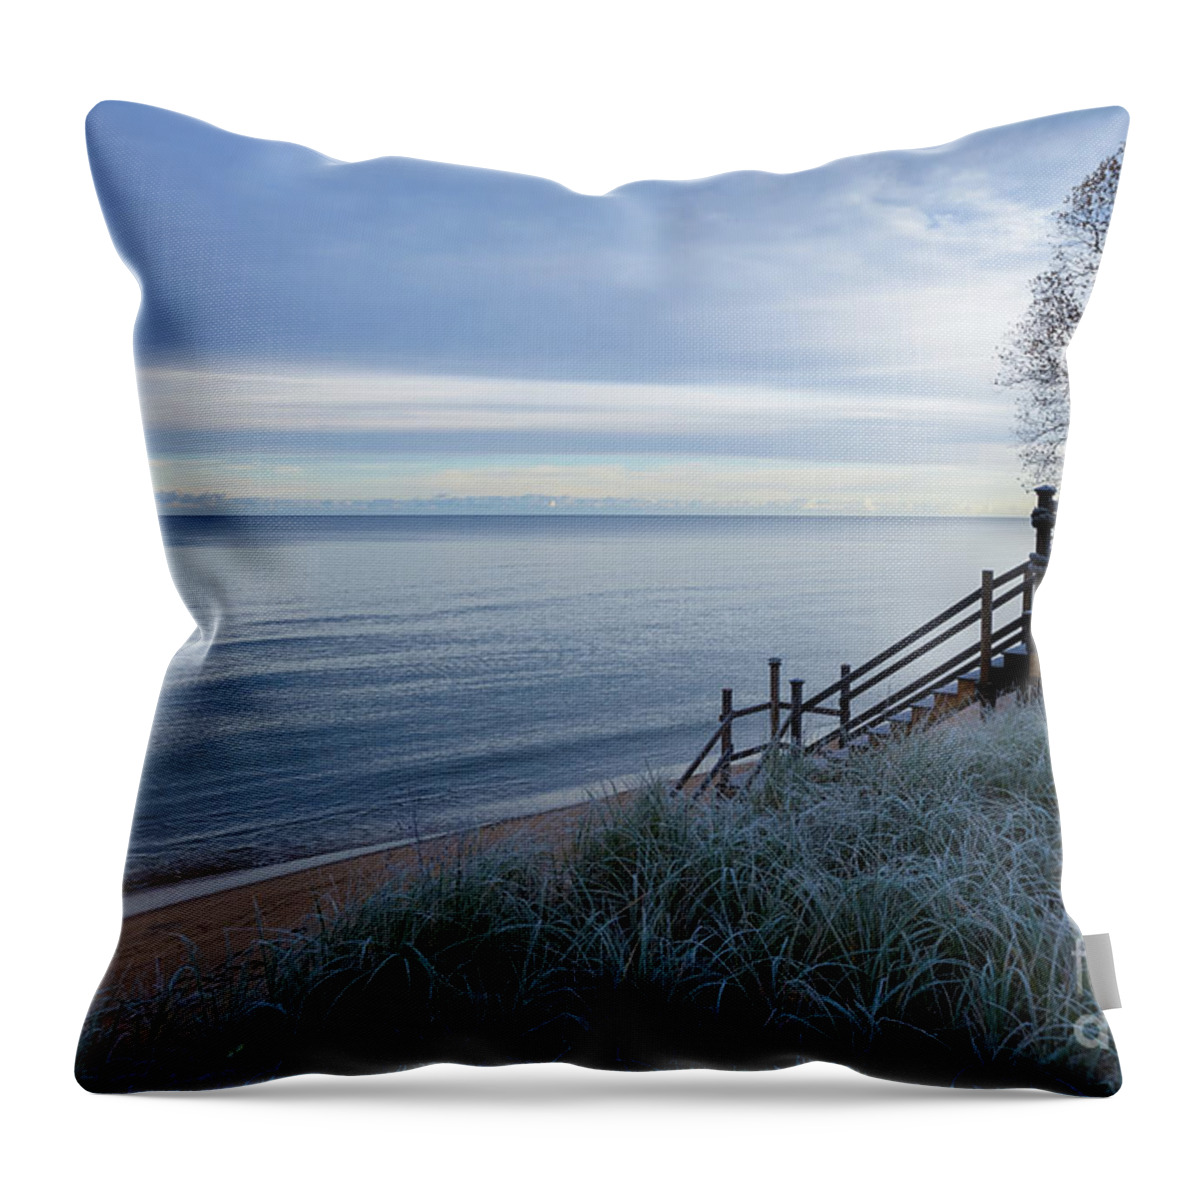 Frosted Calm Throw Pillow featuring the photograph Frosted Calm by Rachel Cohen